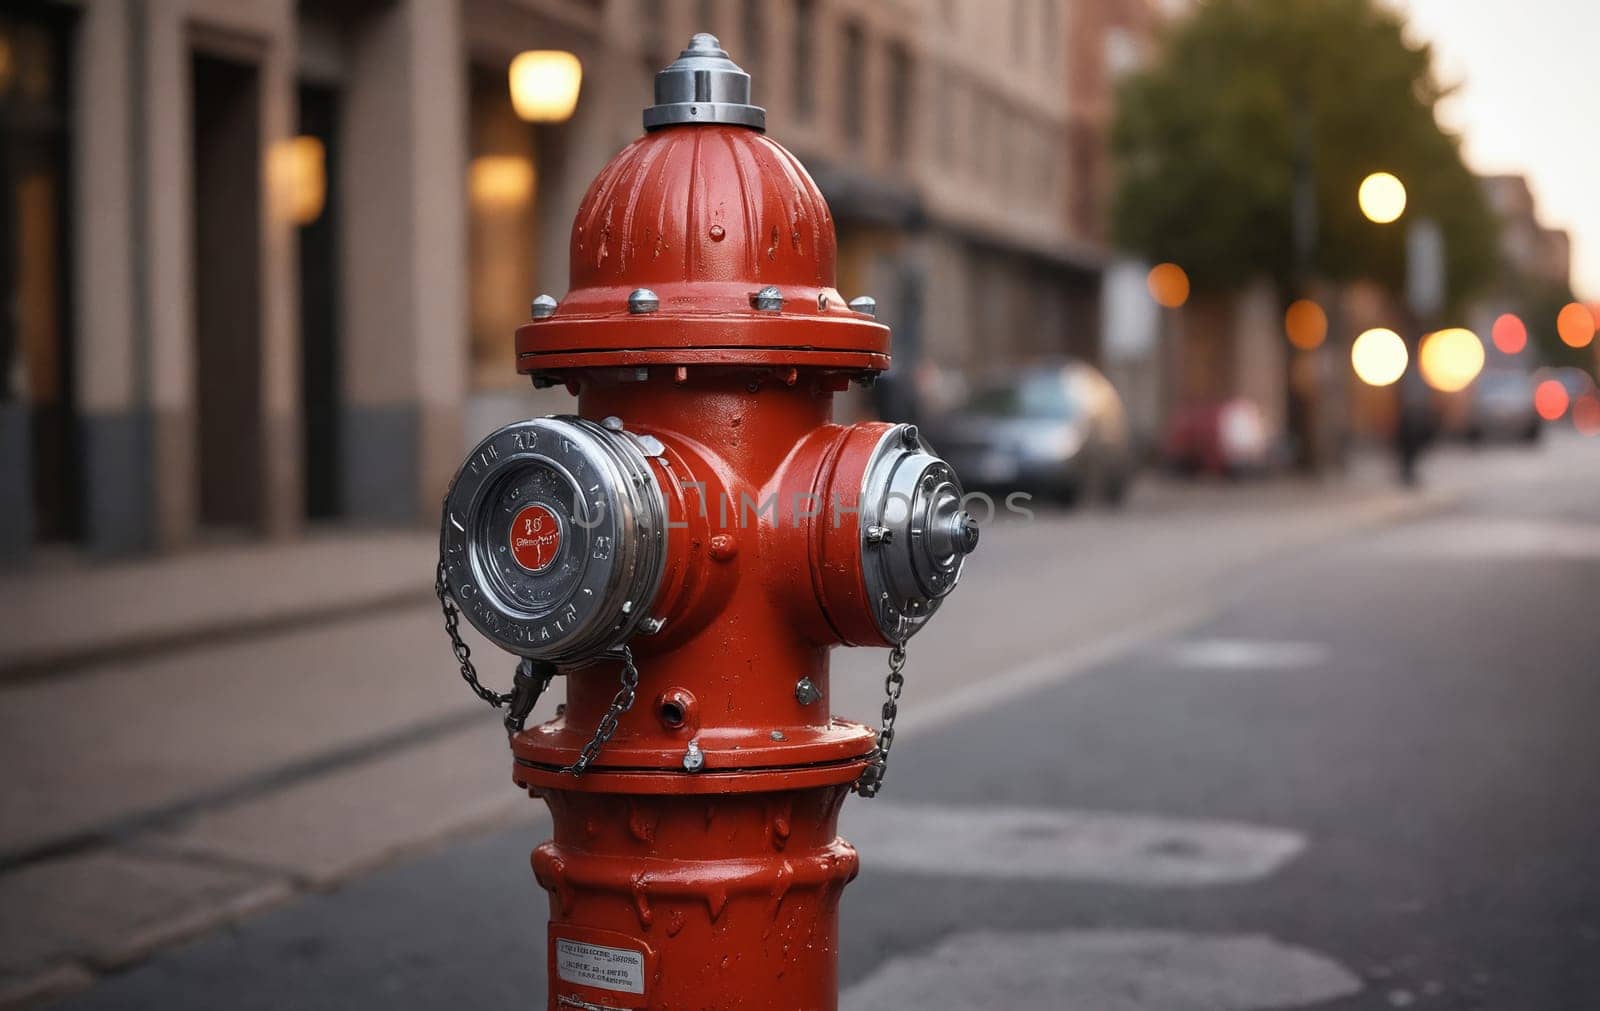 A vibrant fire hydrant image standing ready and alert, illustrating the ever-prevailing undercurrent of urban preparedness.